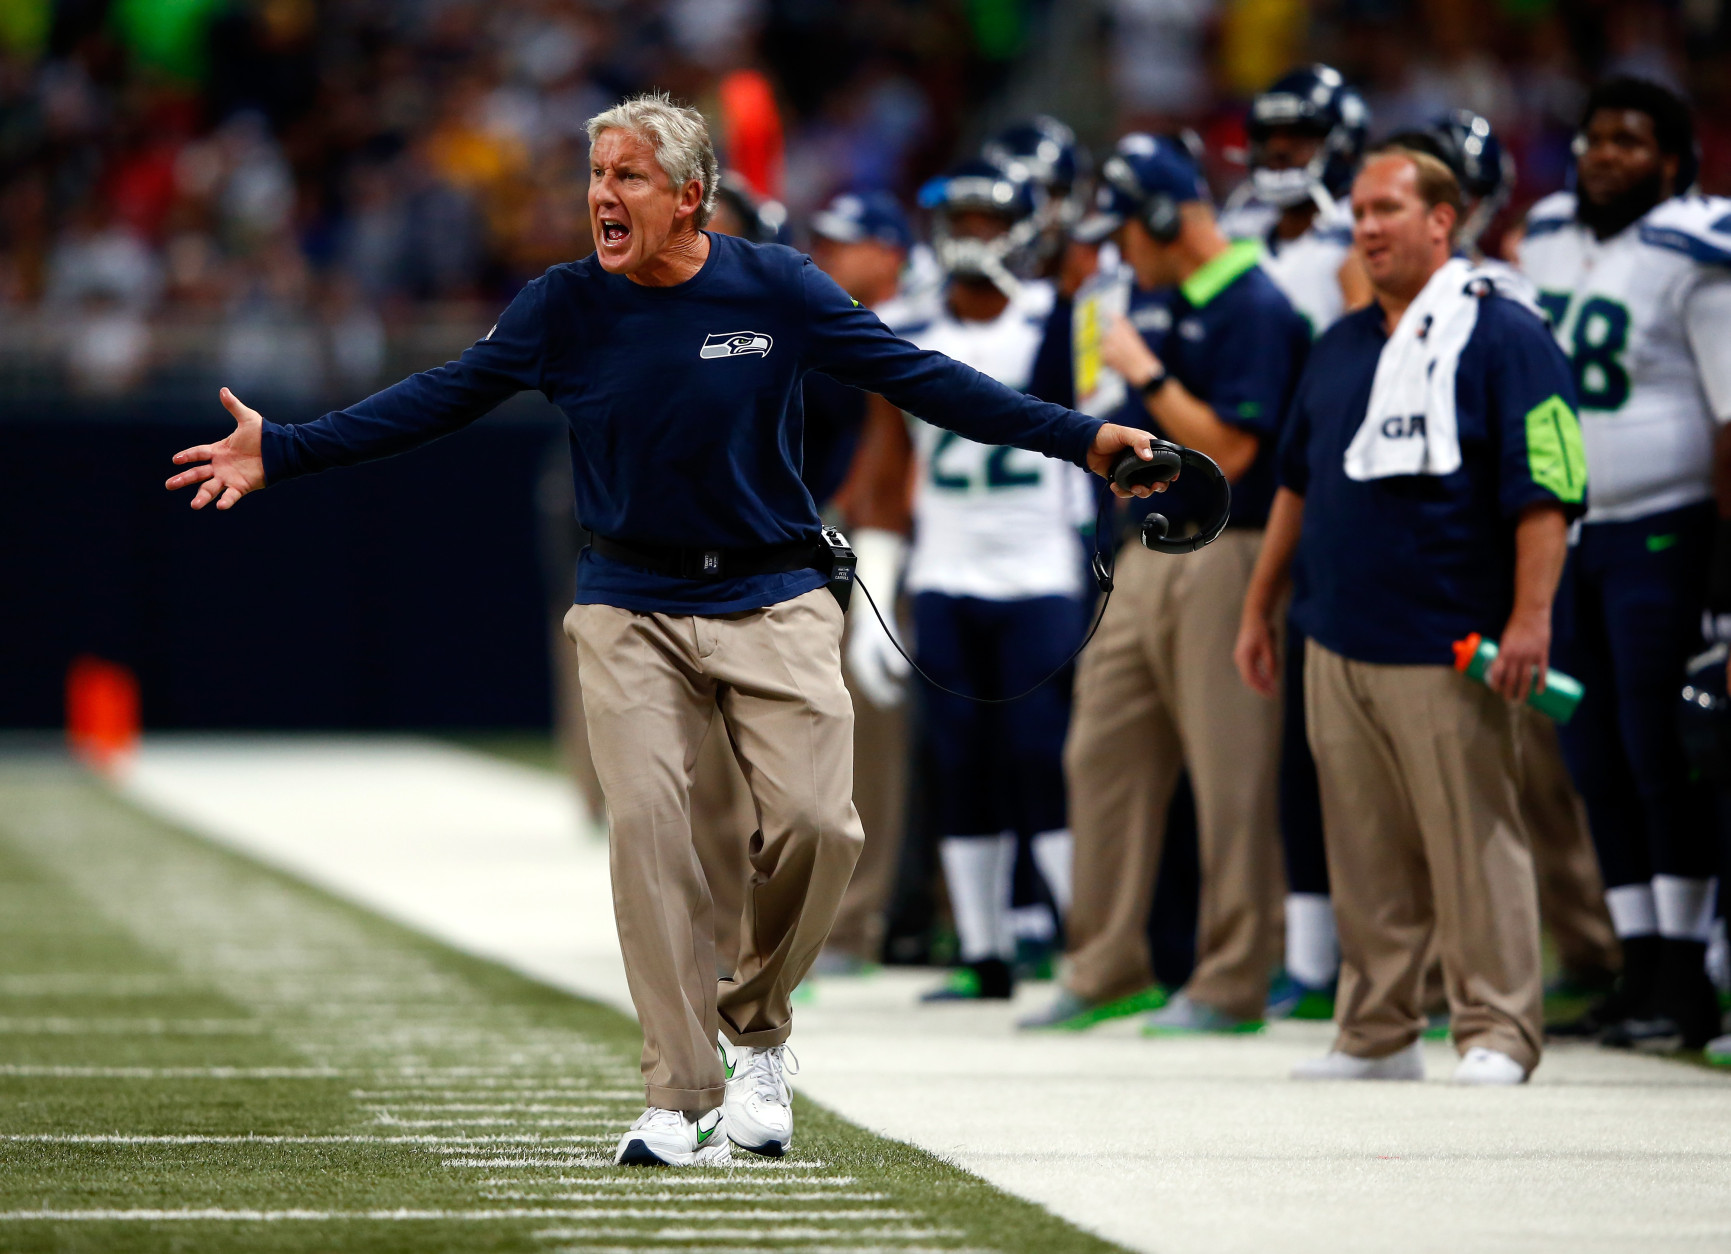 ST LOUIS, MO - SEPTEMBER 13:  Head coach Pete Carroll of the Seattle Seahawks questions a call during the game against the St. Louis Rams at Edward Jones Dome on September 13, 2015 in St Louis, Missouri.  (Photo by Jamie Squire/Getty Images)